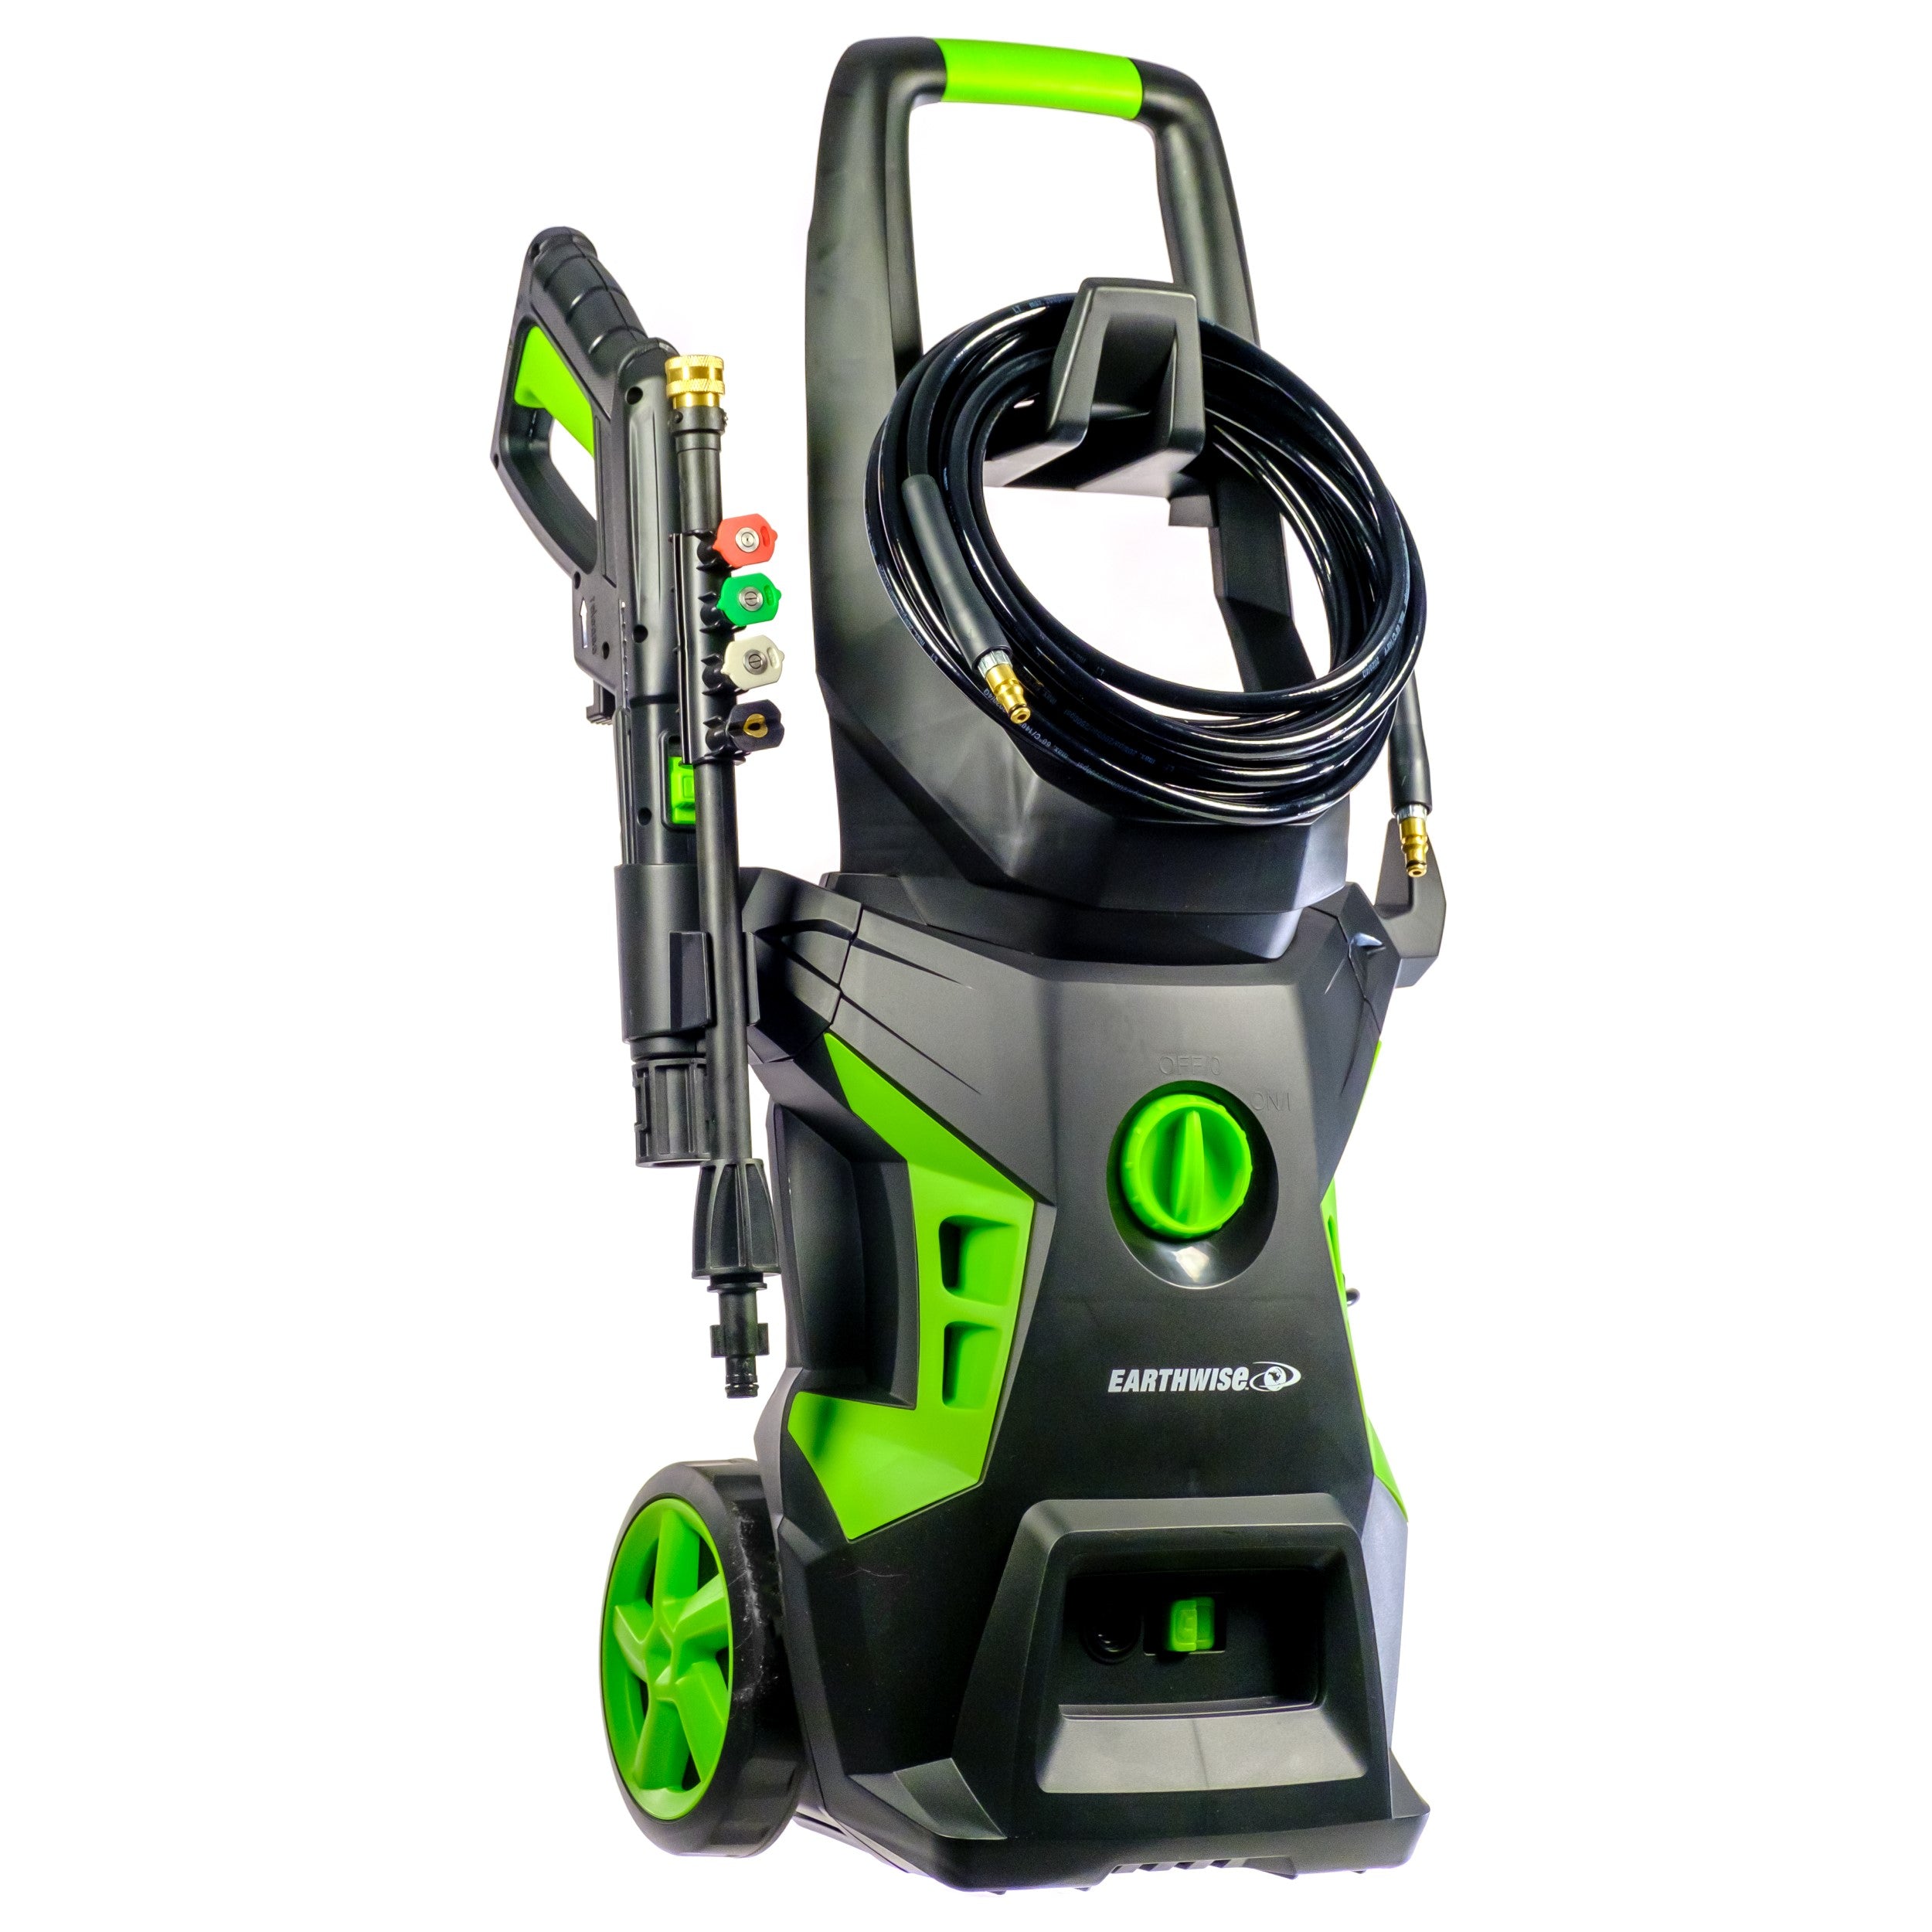 Earthwise Power Tools by ALM 1900 psi Cannister Pressure Washer - Black